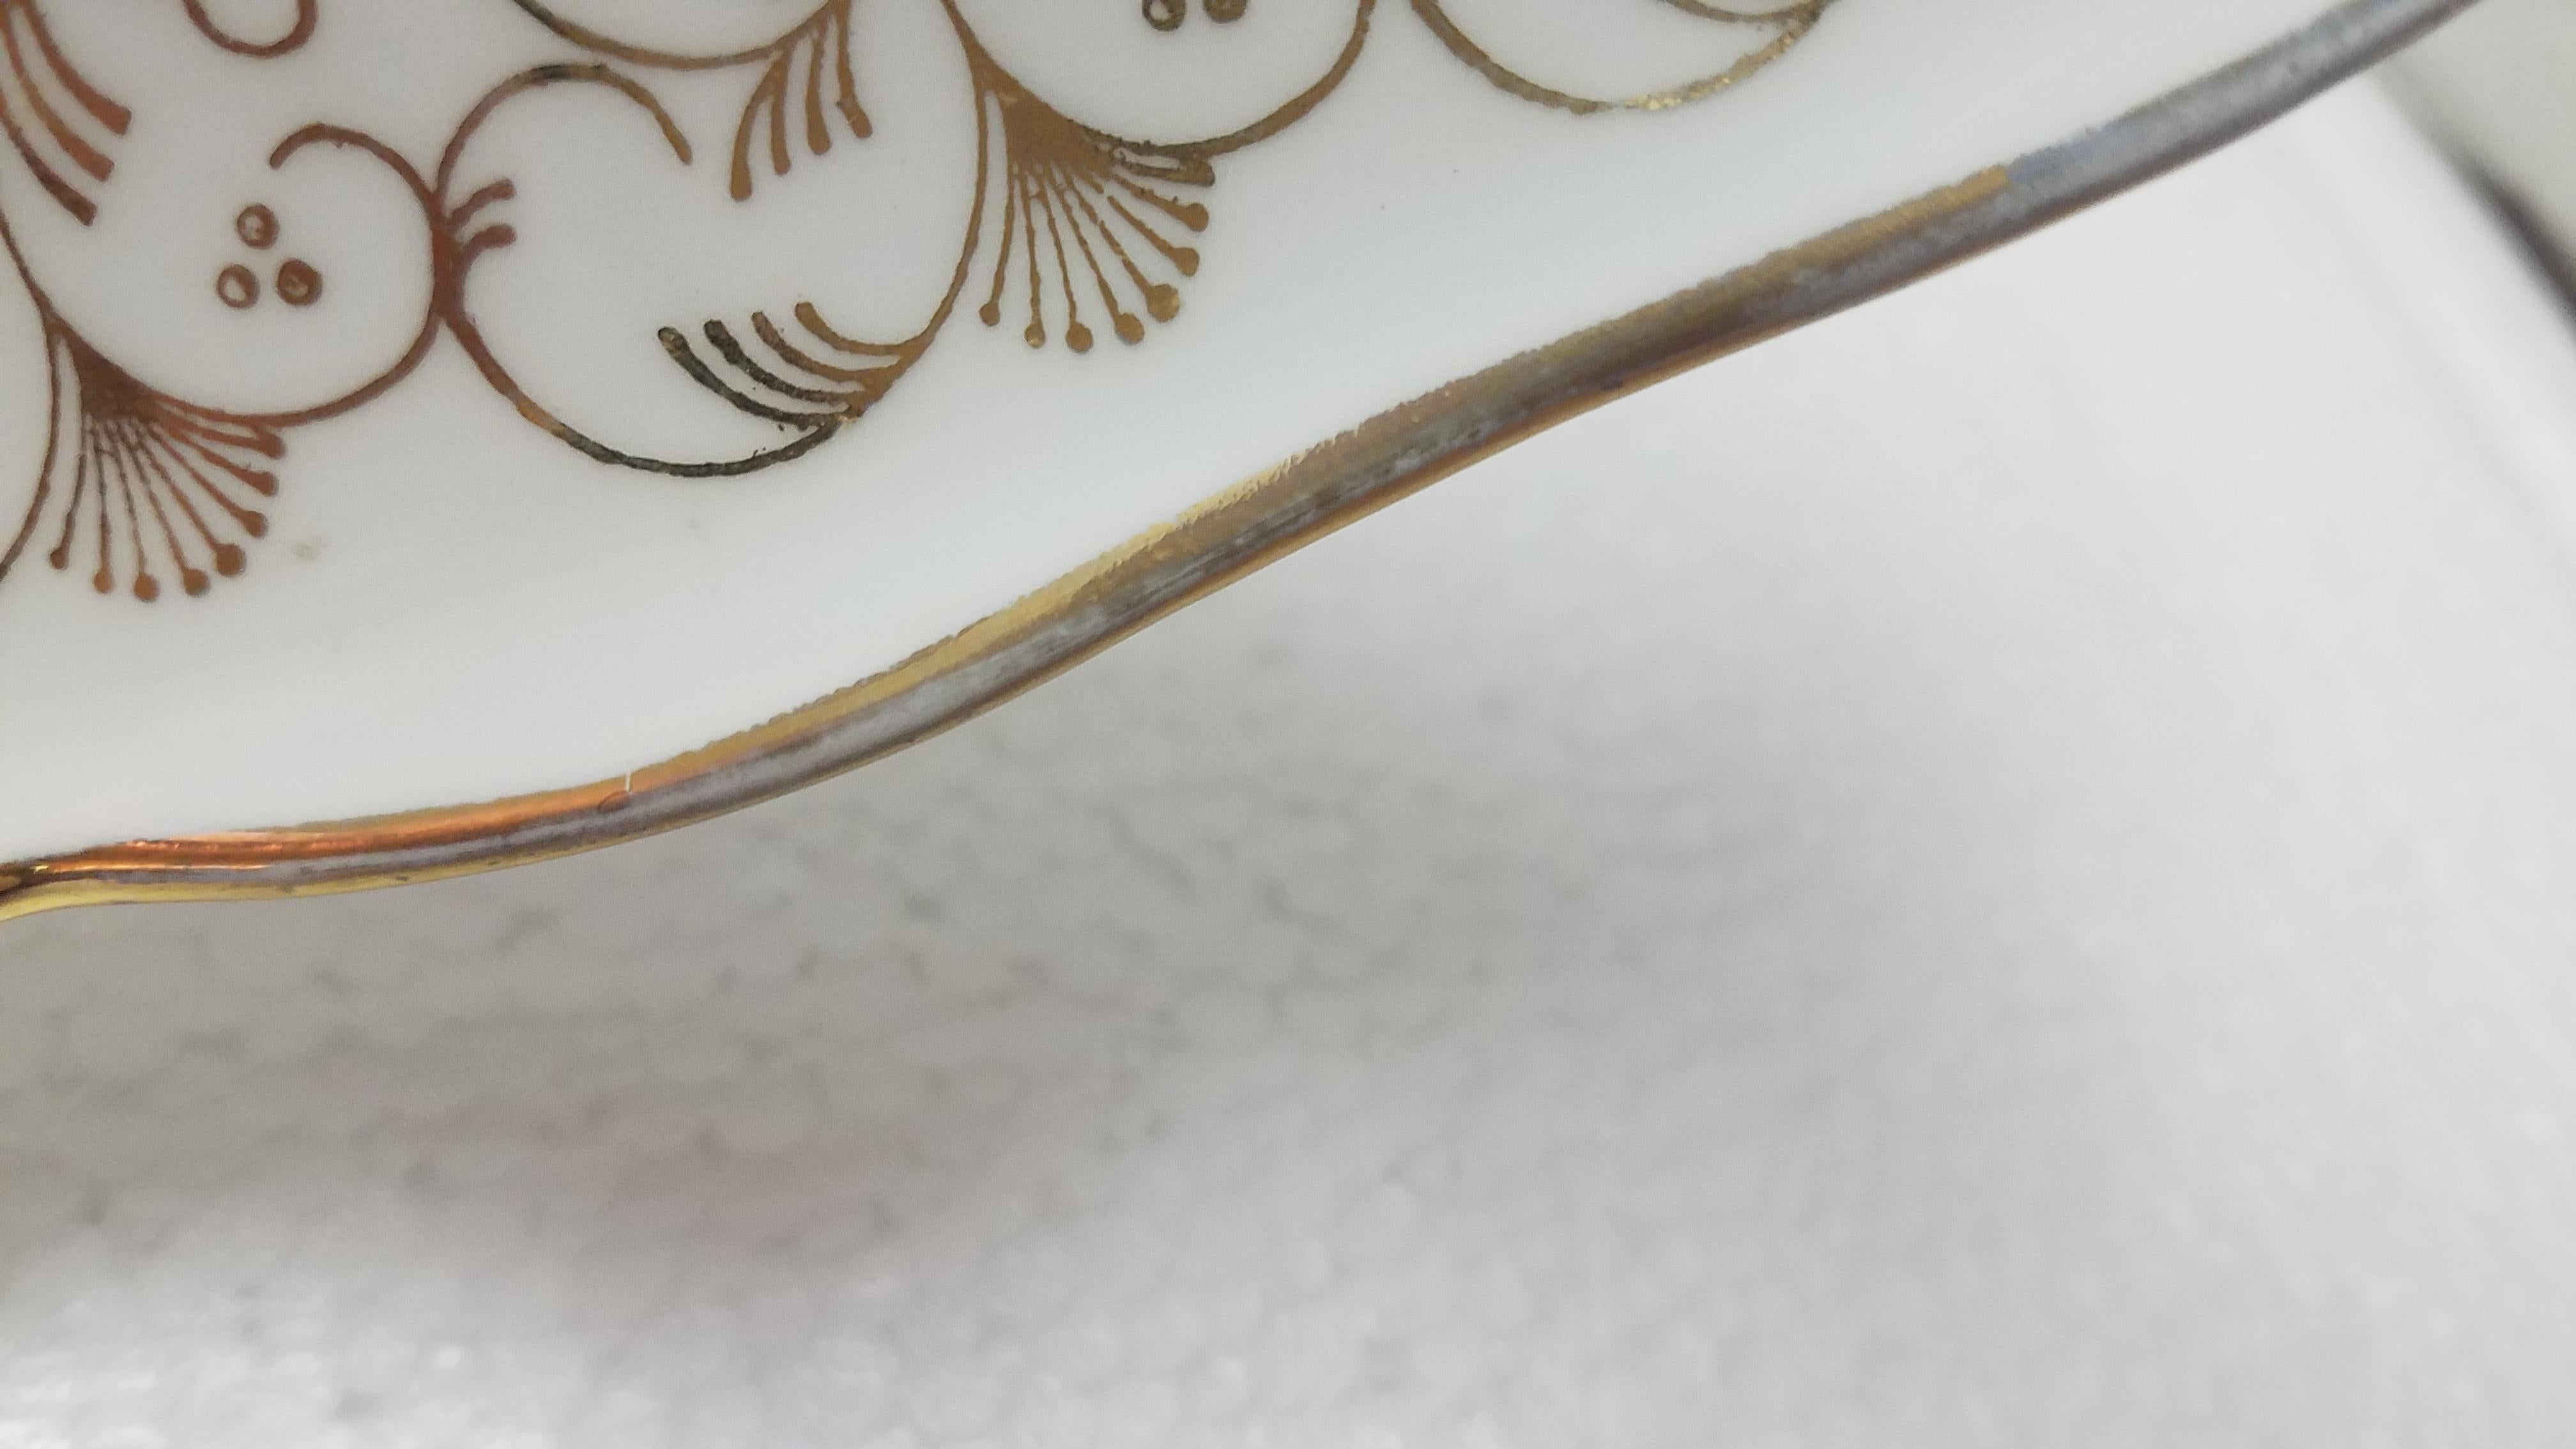 Hand painted French Porcelain fish plate. Ruffled edge accented with 24-carat gold detail. Please see all photos as some of the gold is worn on some of the edges. See photos for the detail of the underwater scene. Makers mark on the bottom 